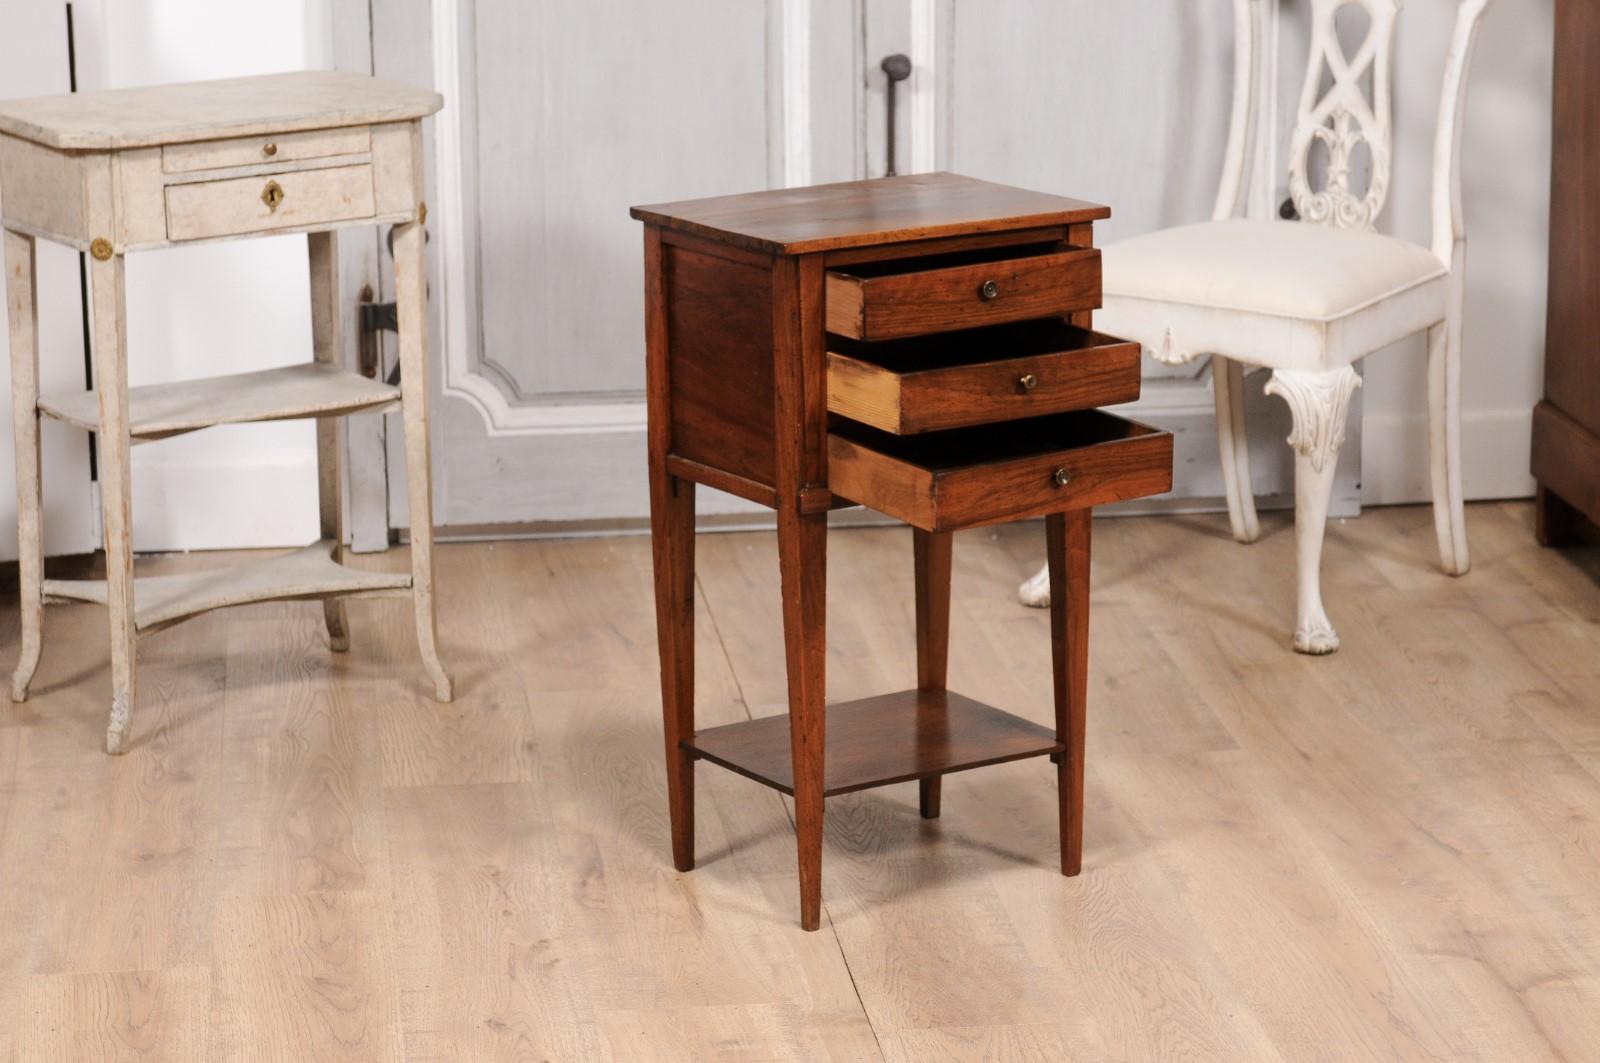 18th Century Italian Walnut Bedside Table with Three Drawers and Tapering Legs For Sale 1